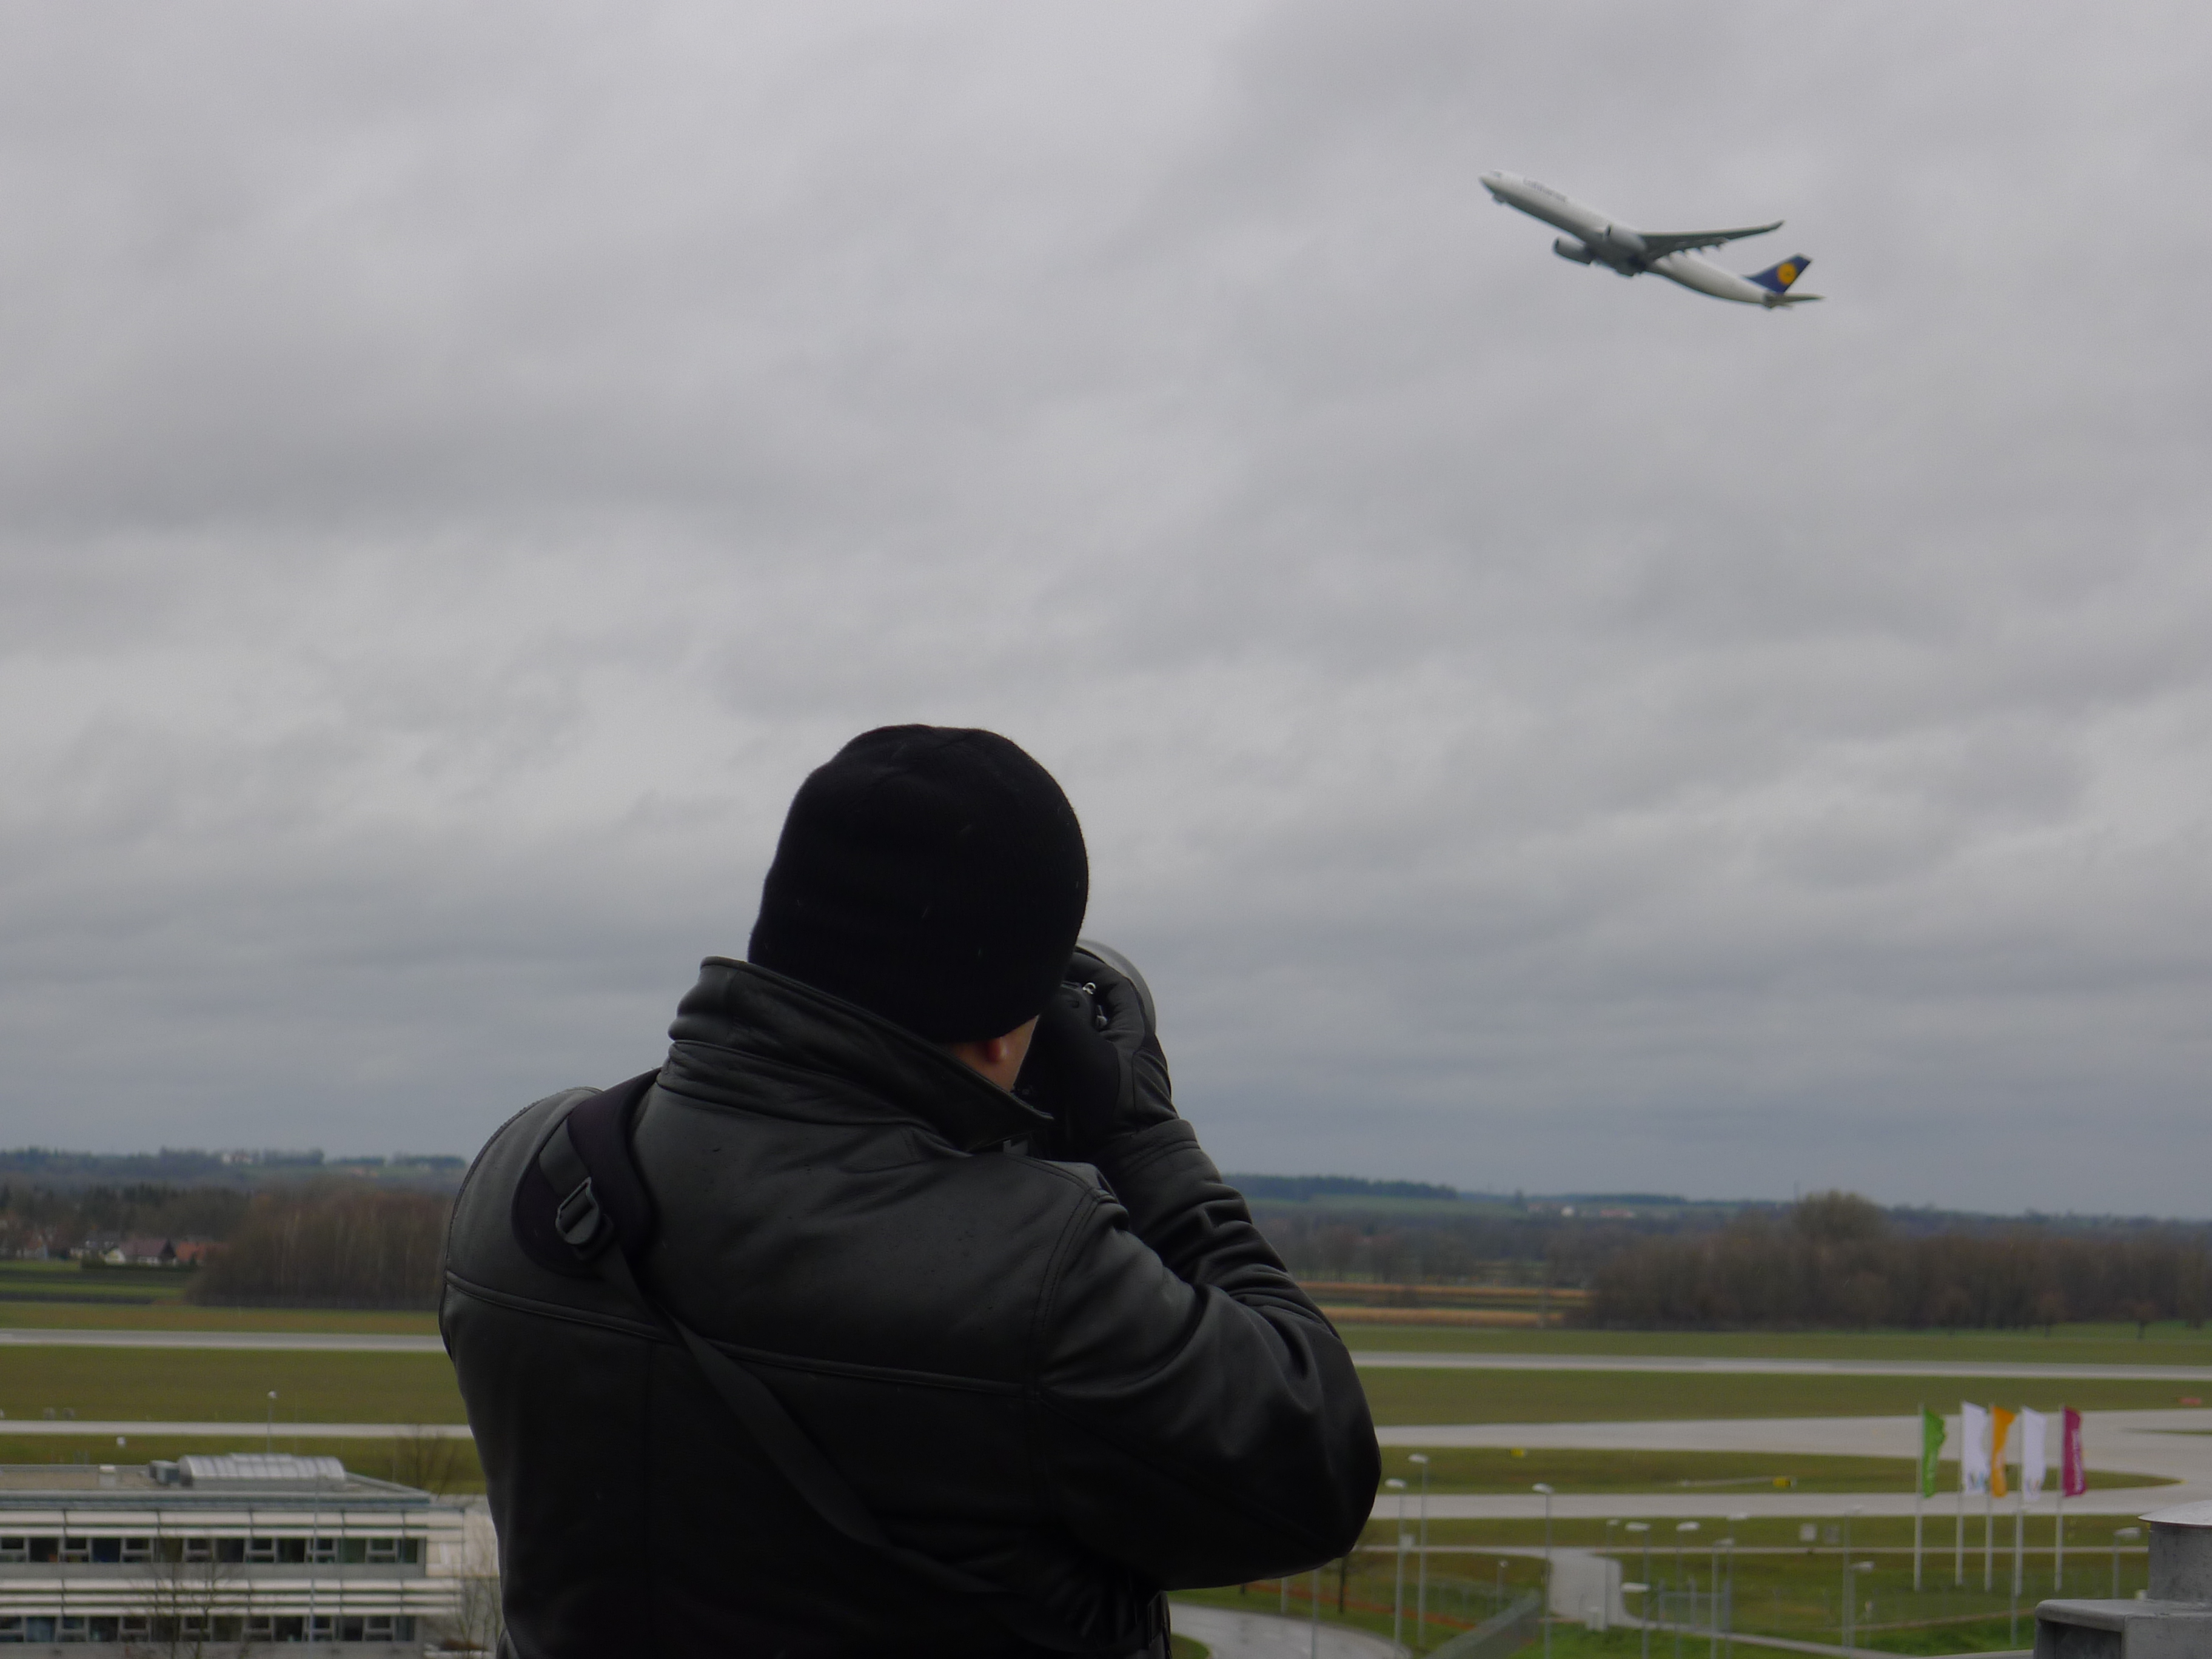 Spotting the spotter as KS departed Munich. Thanks to FlyerTalk's 'NewbieRunner' for catching the moment! 